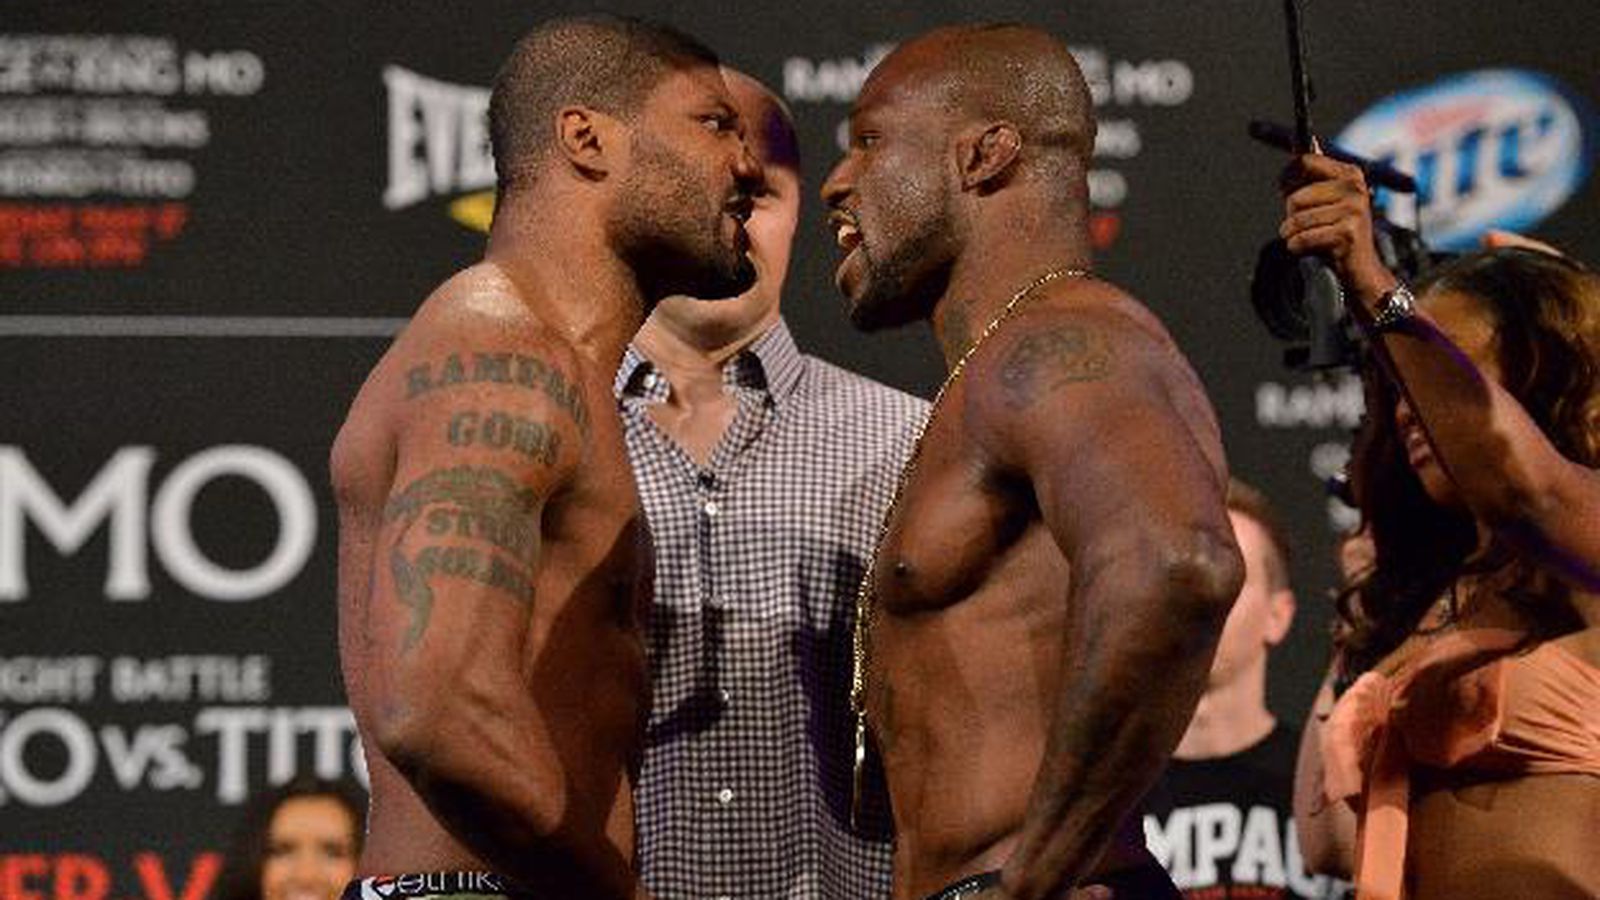 Rampage Jackson vs. King Mo staredown pic from Bellator 120 weigh ins - MMAmania.com1600 x 900